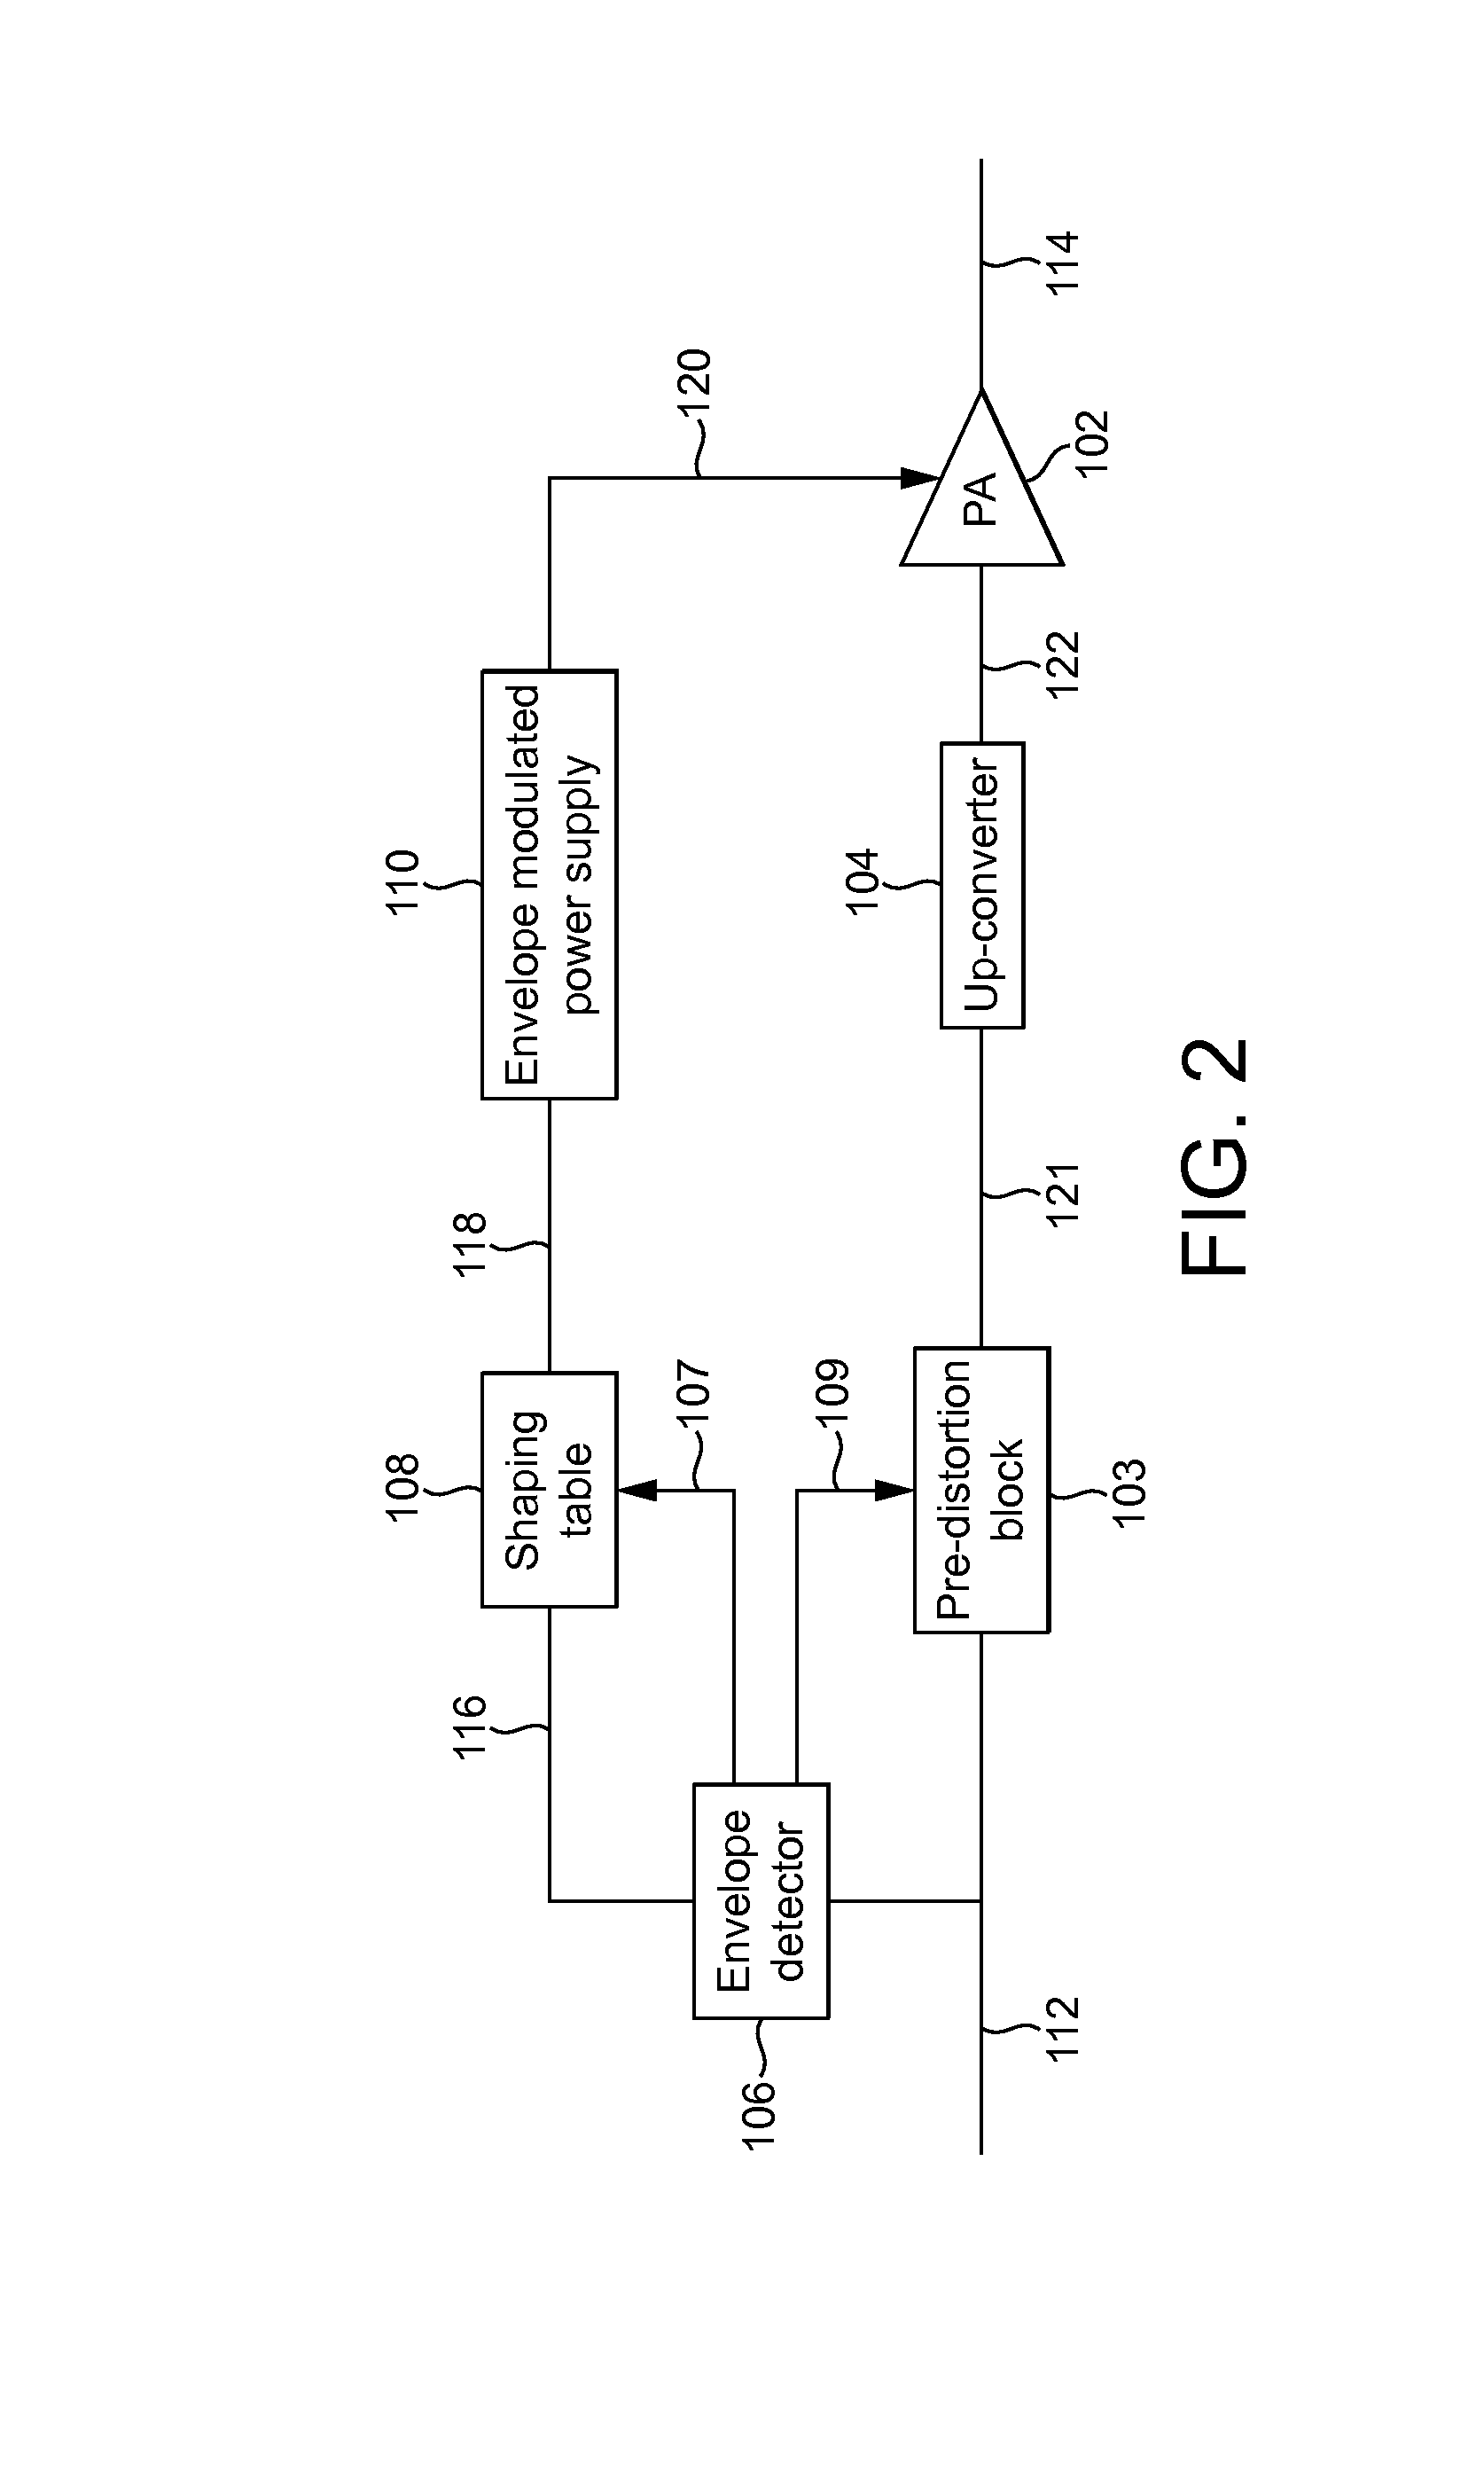 Pre-distortion in RF path in combination with shaping table in envelope path for envelope tracking amplifier